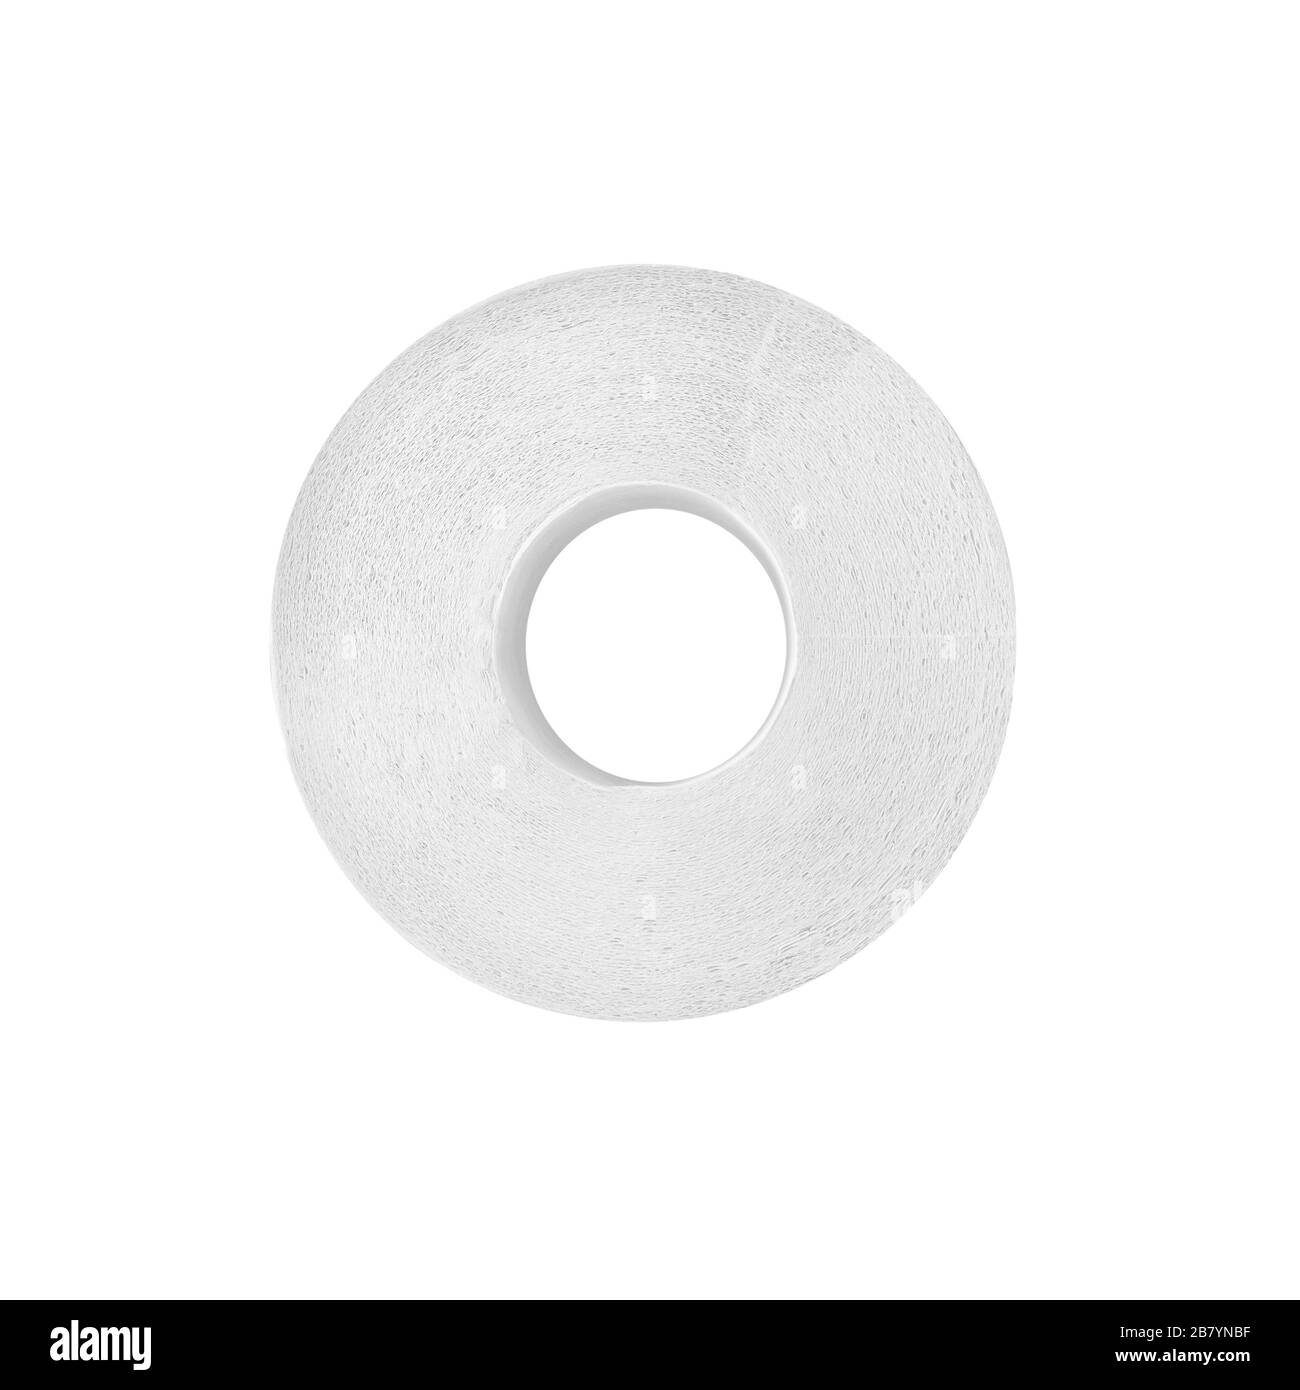 White toilet paper on white background isolated close up, one circle soft bog roll top view, paper tissues, design element, hygiene accessory Stock Photo